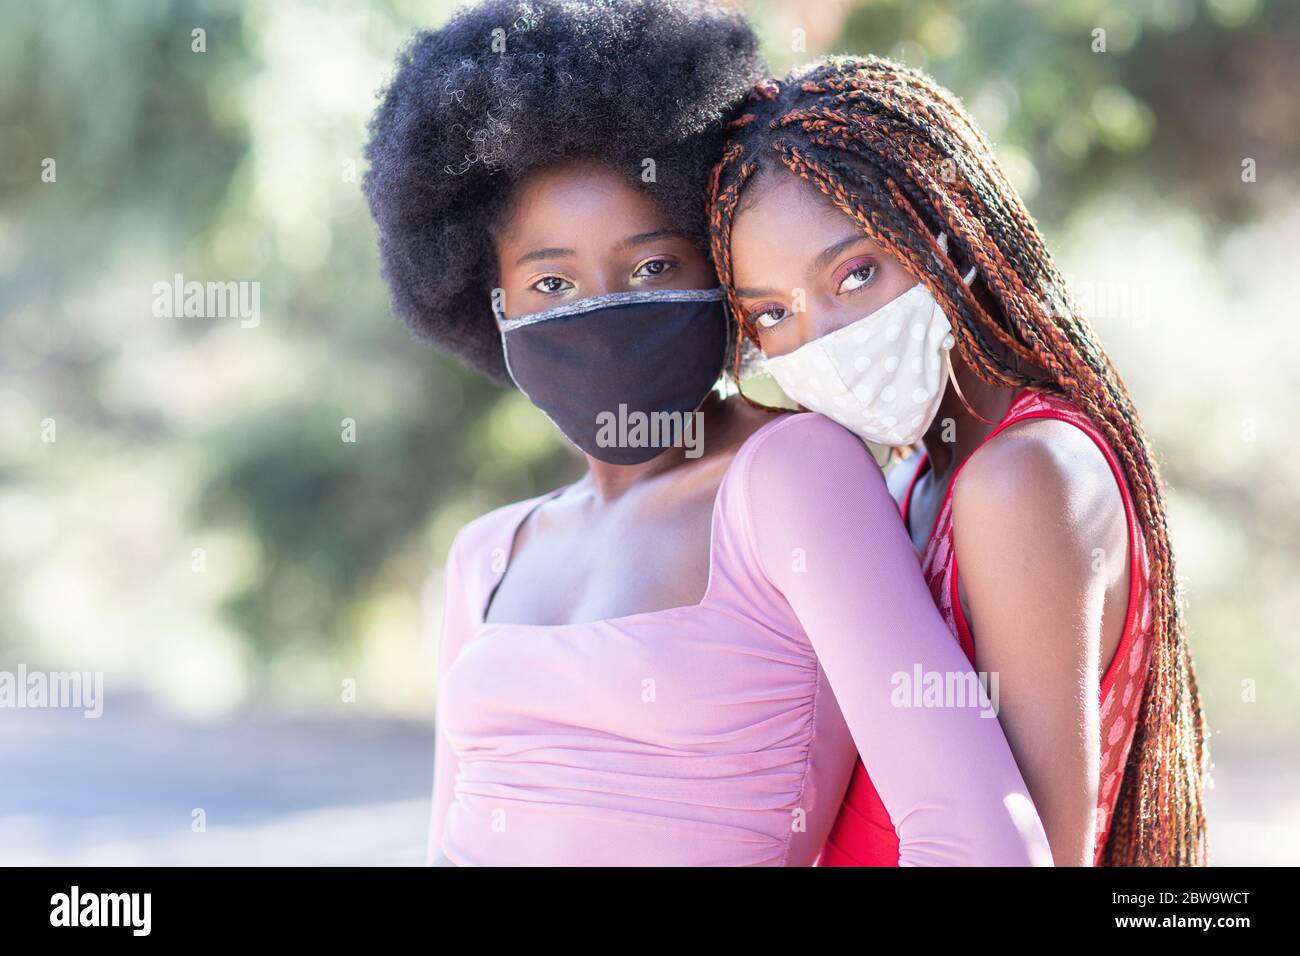 https://c8.alamy.com/comp/2BW9WCT/beautiful-black-girls-outside-wearing-cloth-face-masks-masks-are-mandatory-in-many-places-to-protect-spread-of-coronavirus-2BW9WCT.jpg